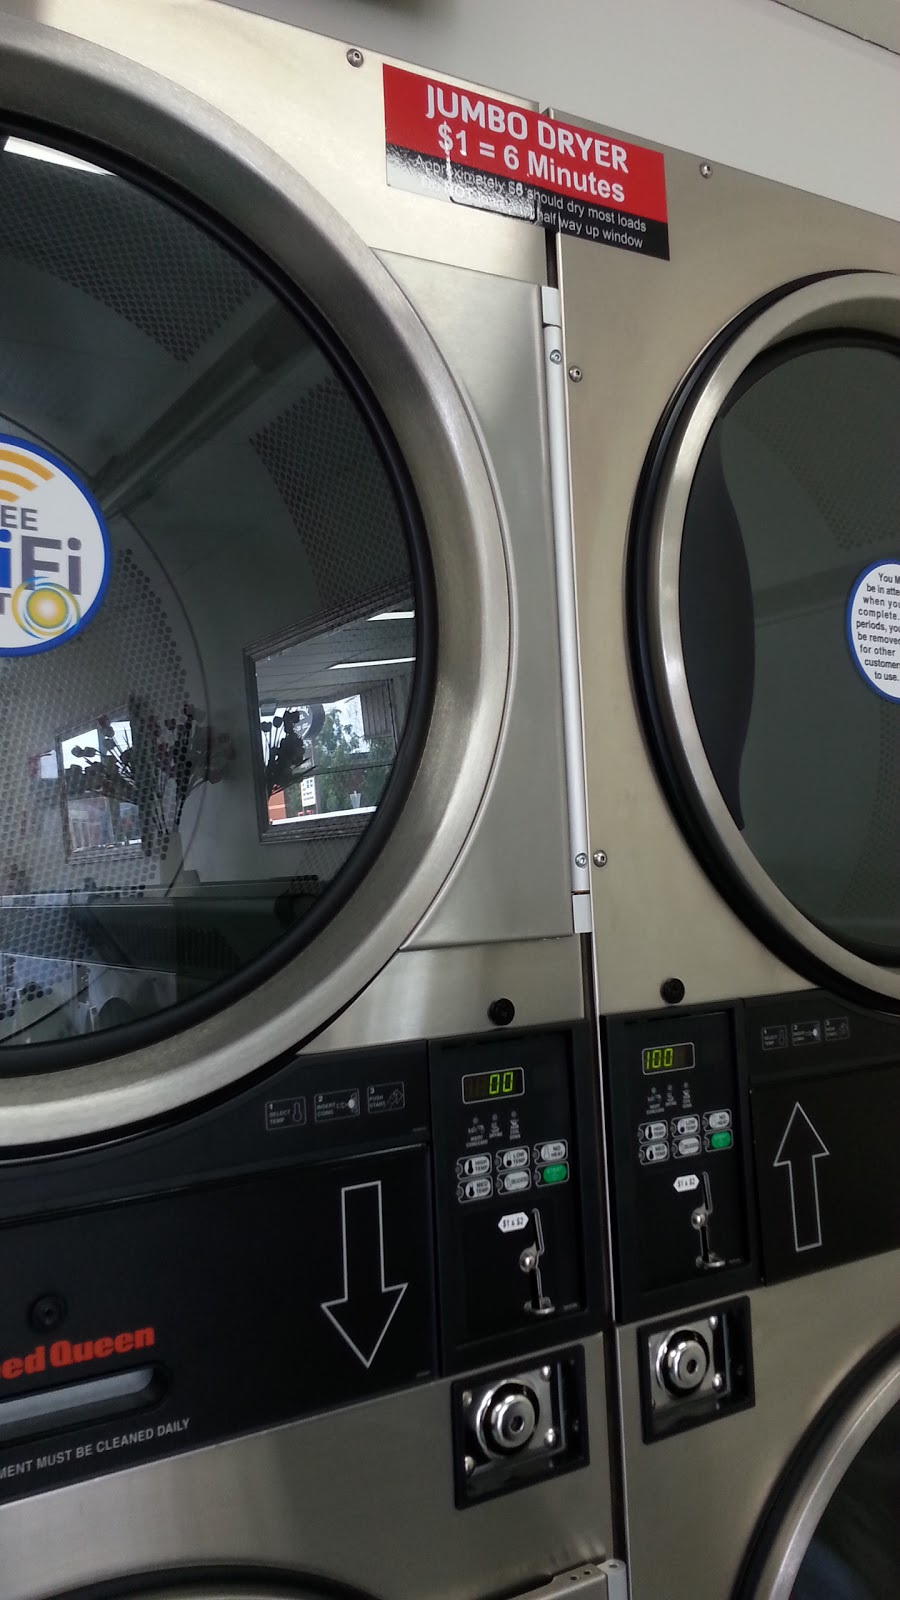 BLUE SAPPHIRE COIN LAUNDRY South Morang | laundry | 19 Gorge Road South Morang 2A Jovic Road, Epping, Melbourne VIC 3076, Australia | 0419872984 OR +61 419 872 984